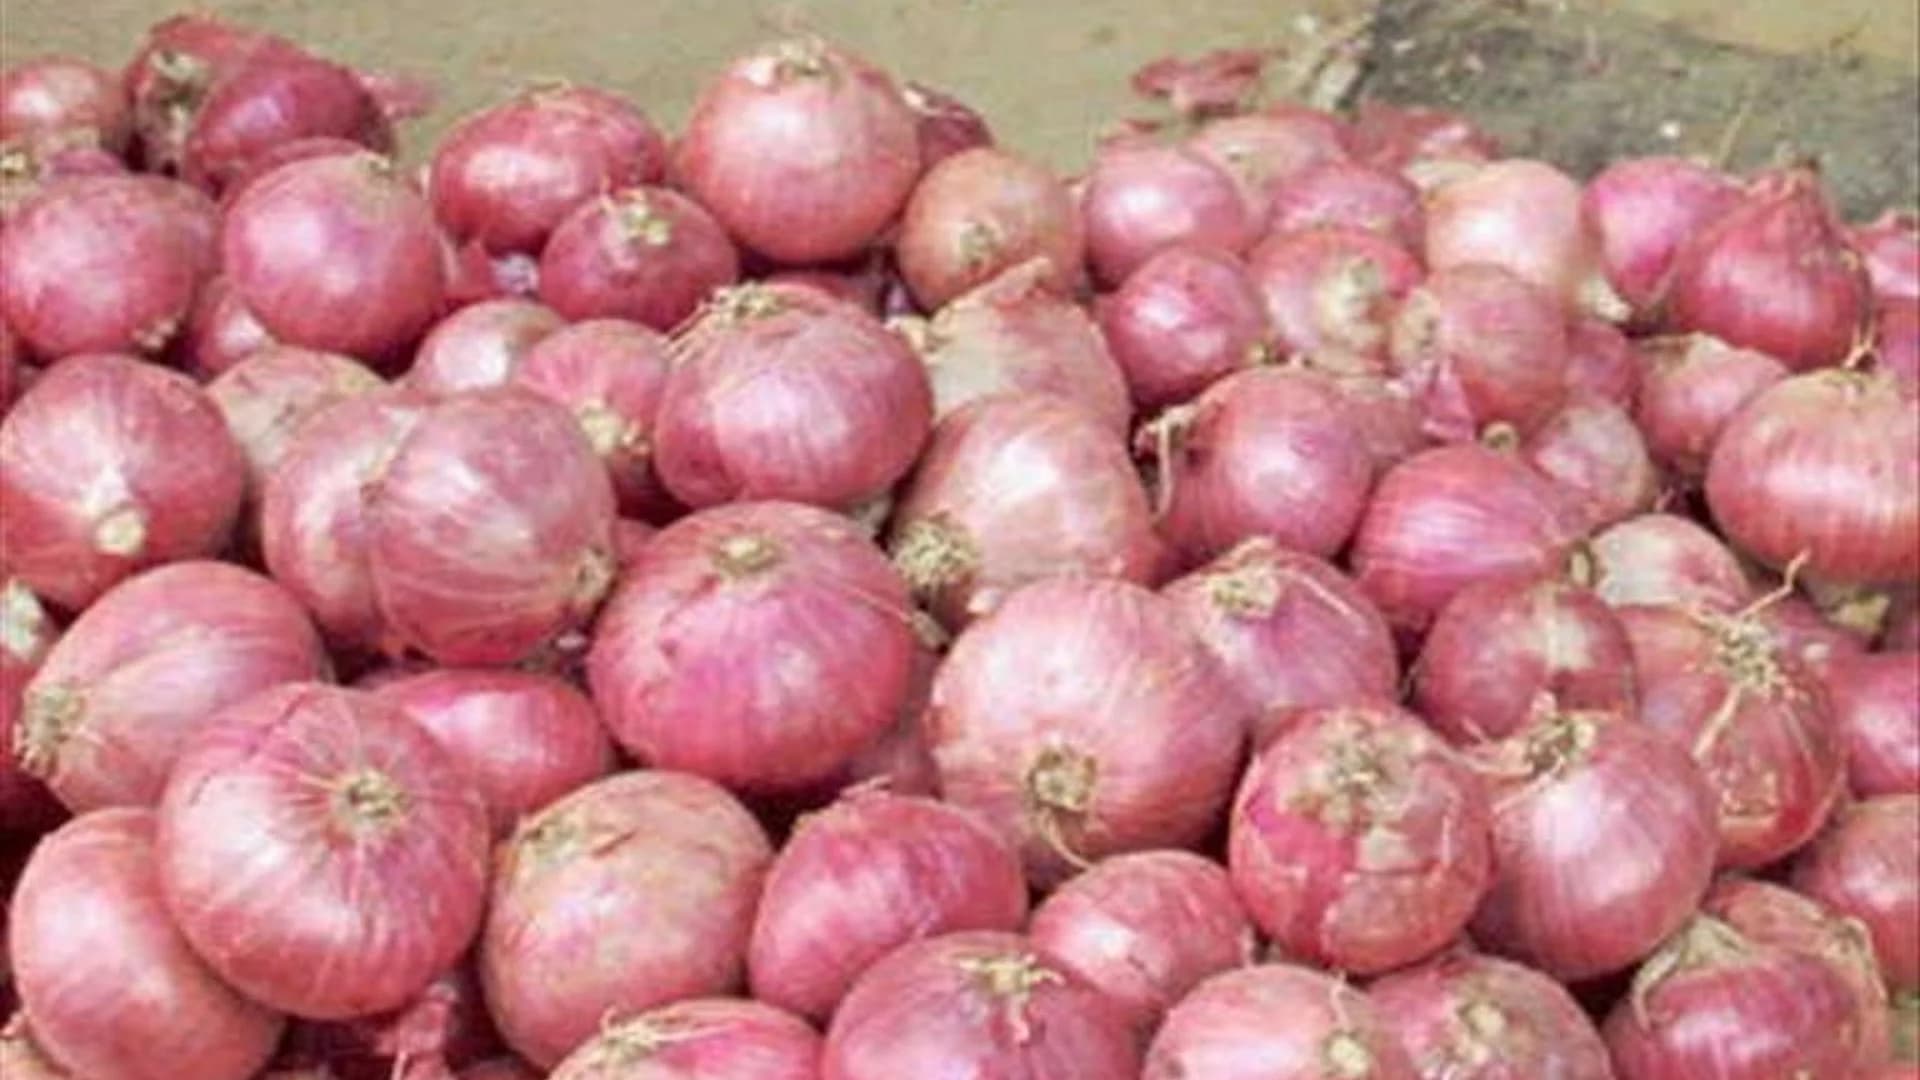 CDC reports salmonella outbreak linked to onions